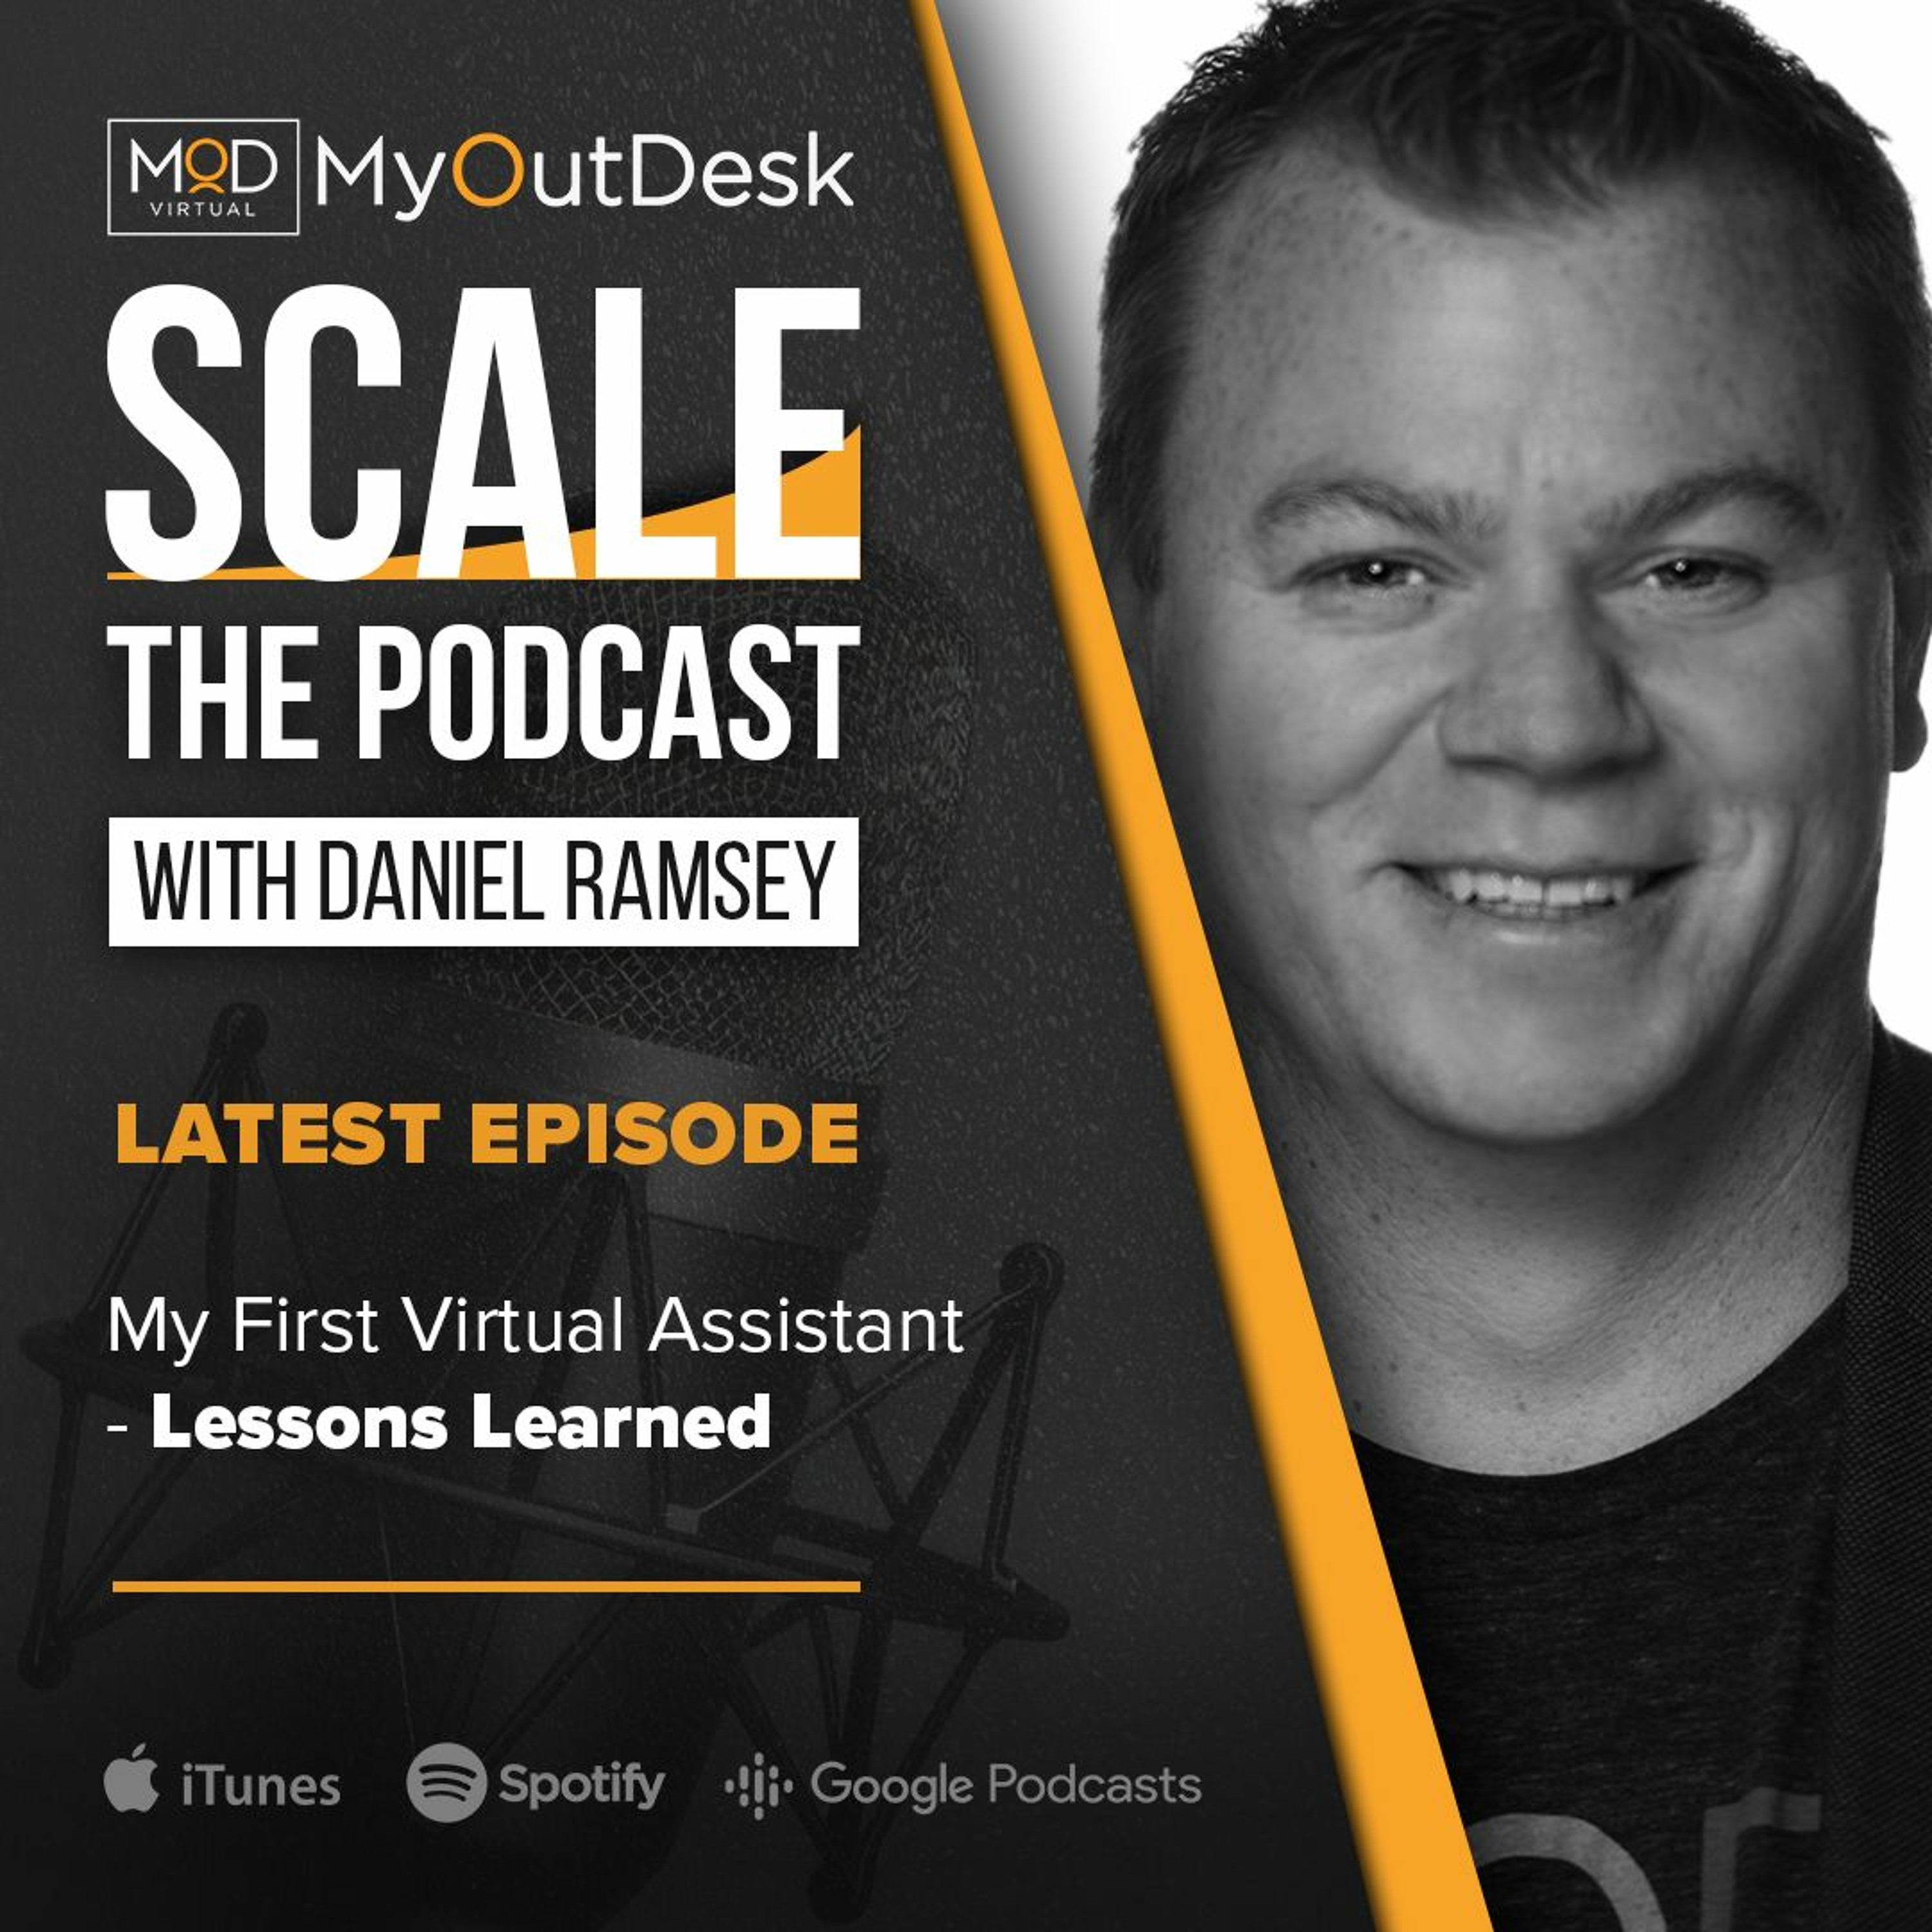 Daniel Ramsey - My First Virtual Assistant - Lessons Learned